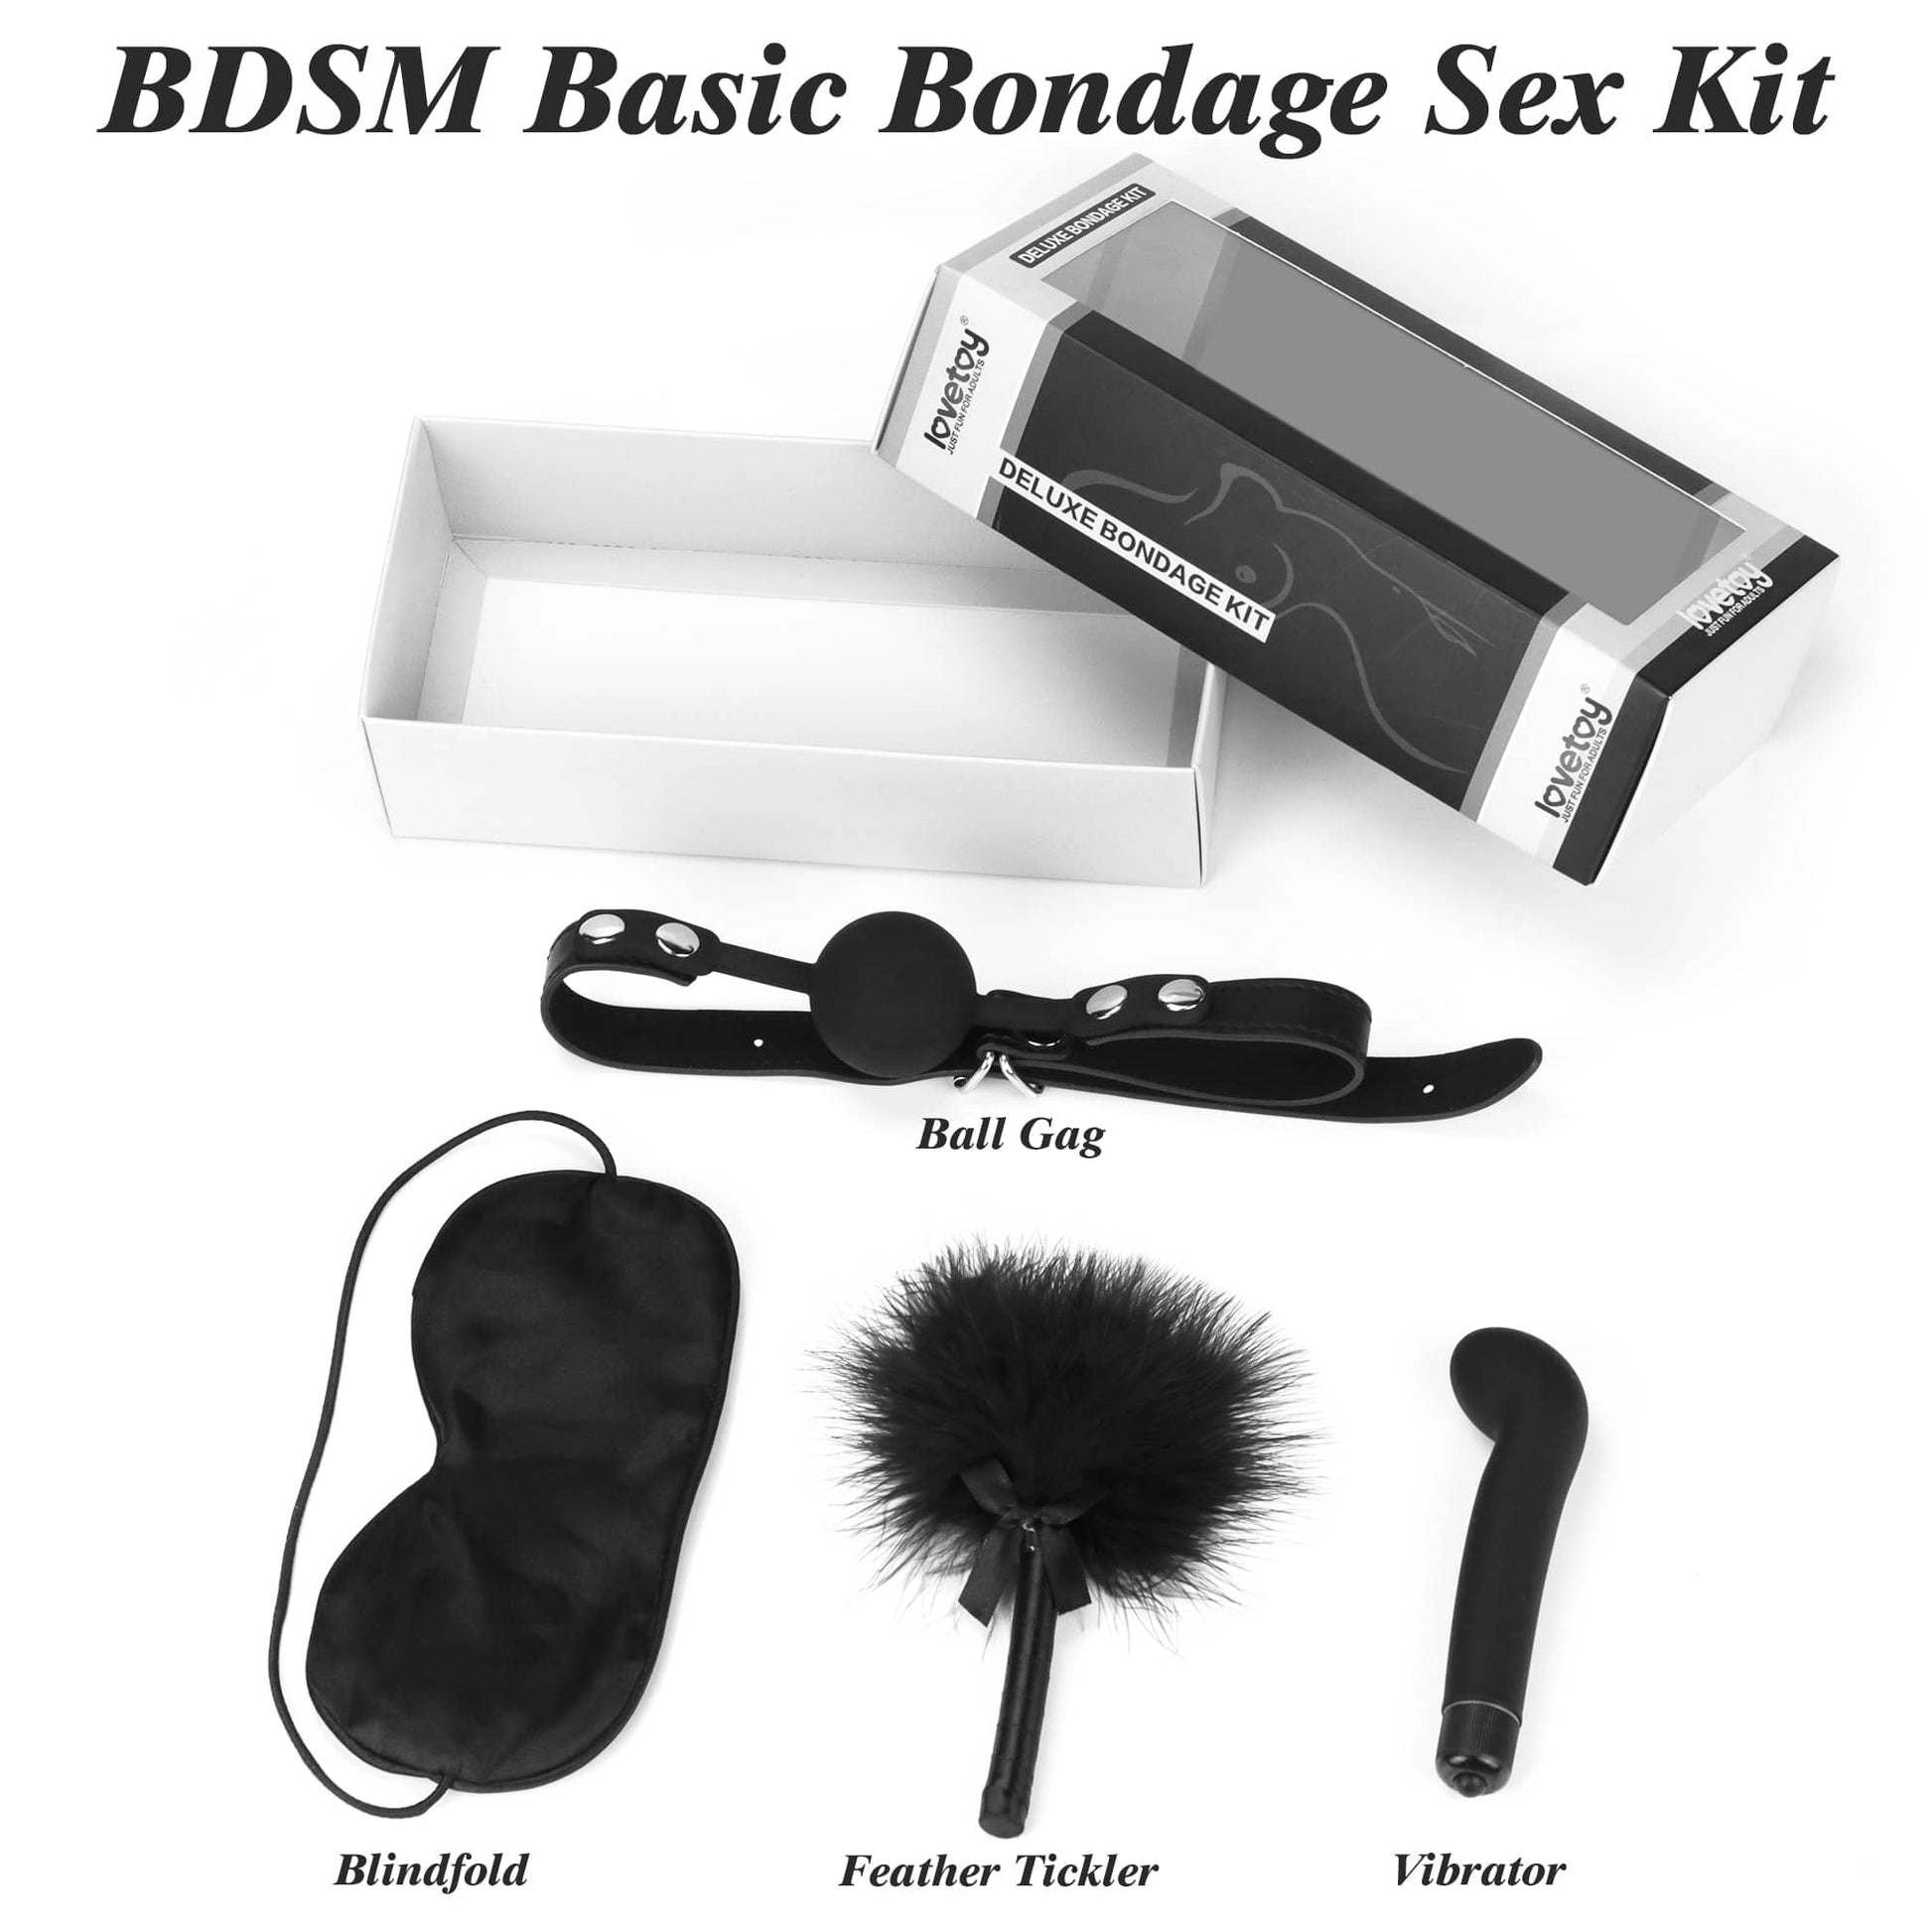 What is involved in the bdsm bondage sets